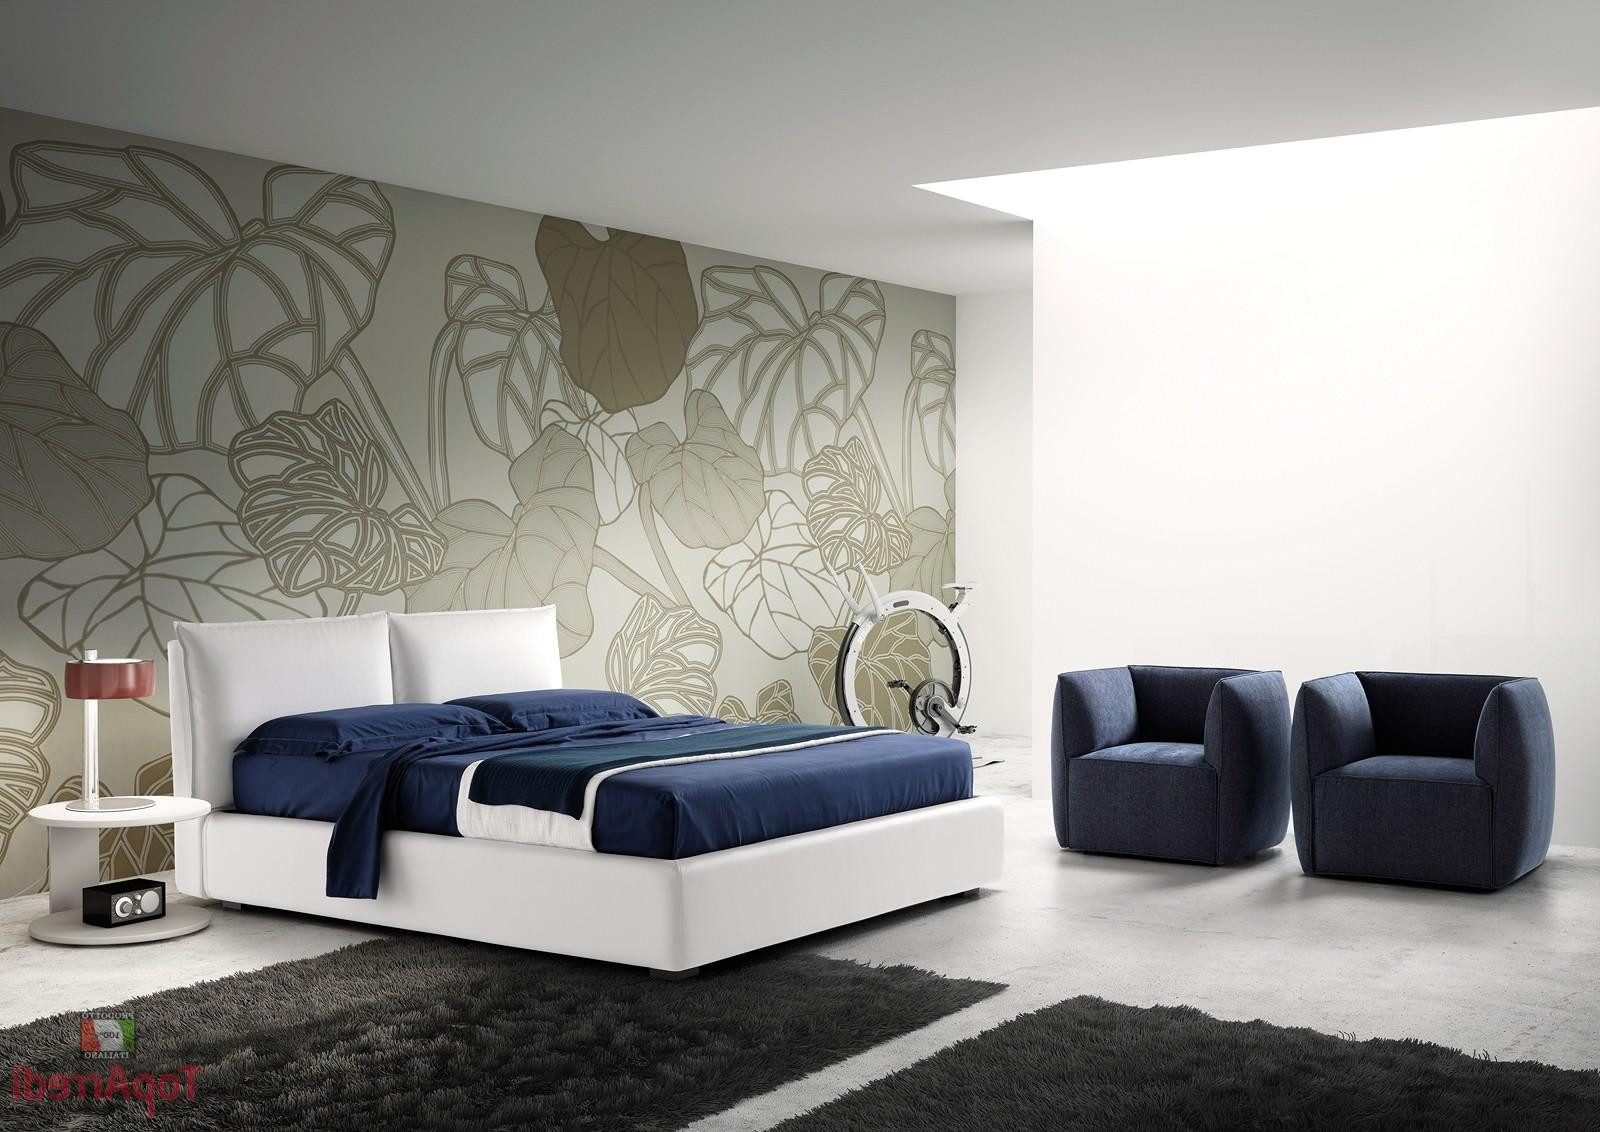 Cool Wall Art For Bedroom
 19 Cool Wall Paintings For Bedrooms To Celebrate The